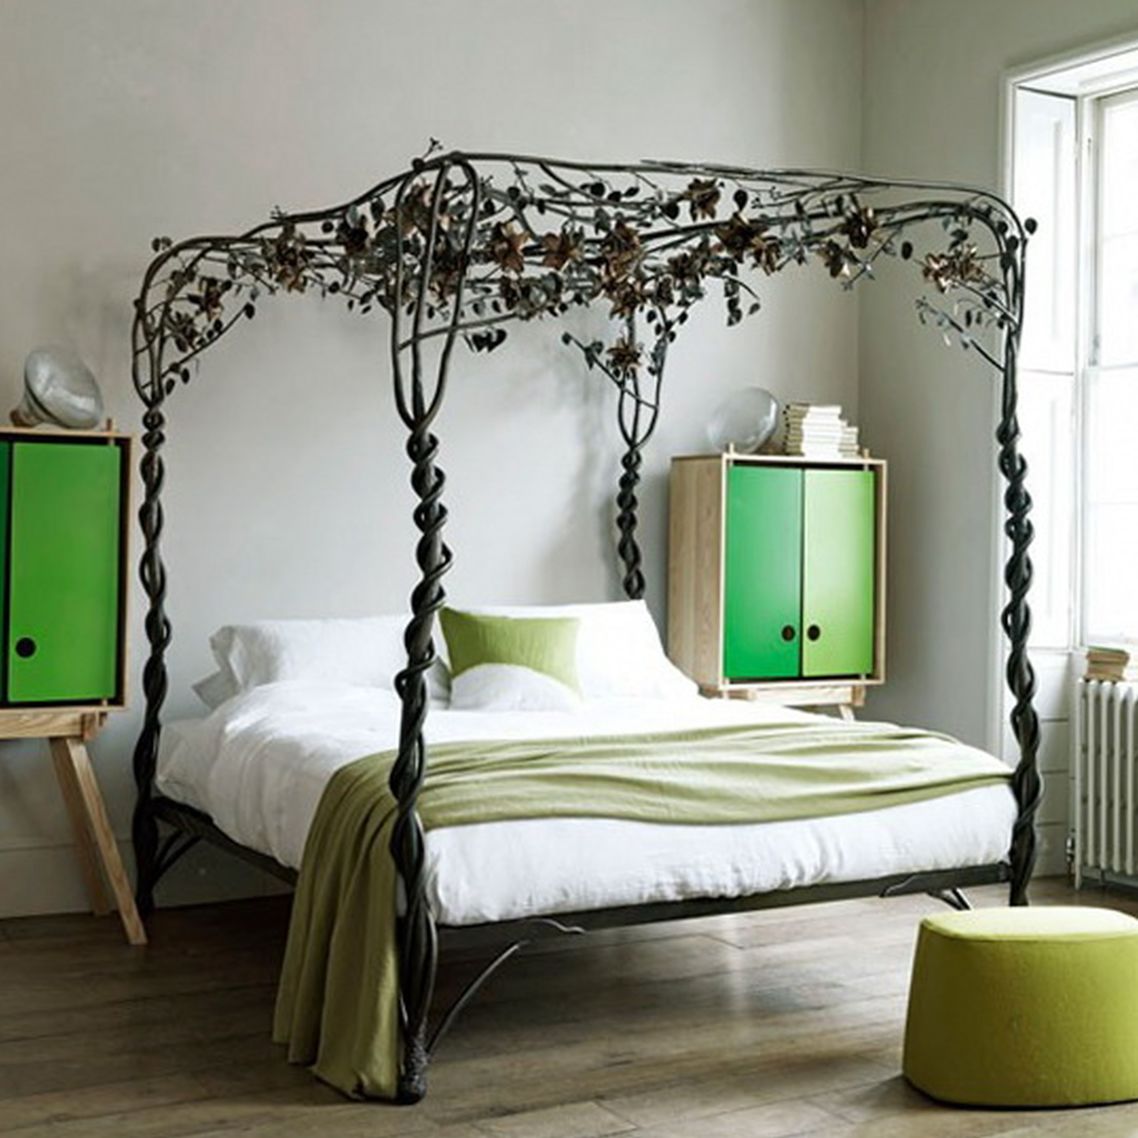 Canopy Bed Vines Classic Canopy Bed Plus Hanging Vines To Beautify Unique Bedroom Ideas With Green Ottoman Bedroom Unique Bedroom Ideas Preserving The Cozy Vibe In Style